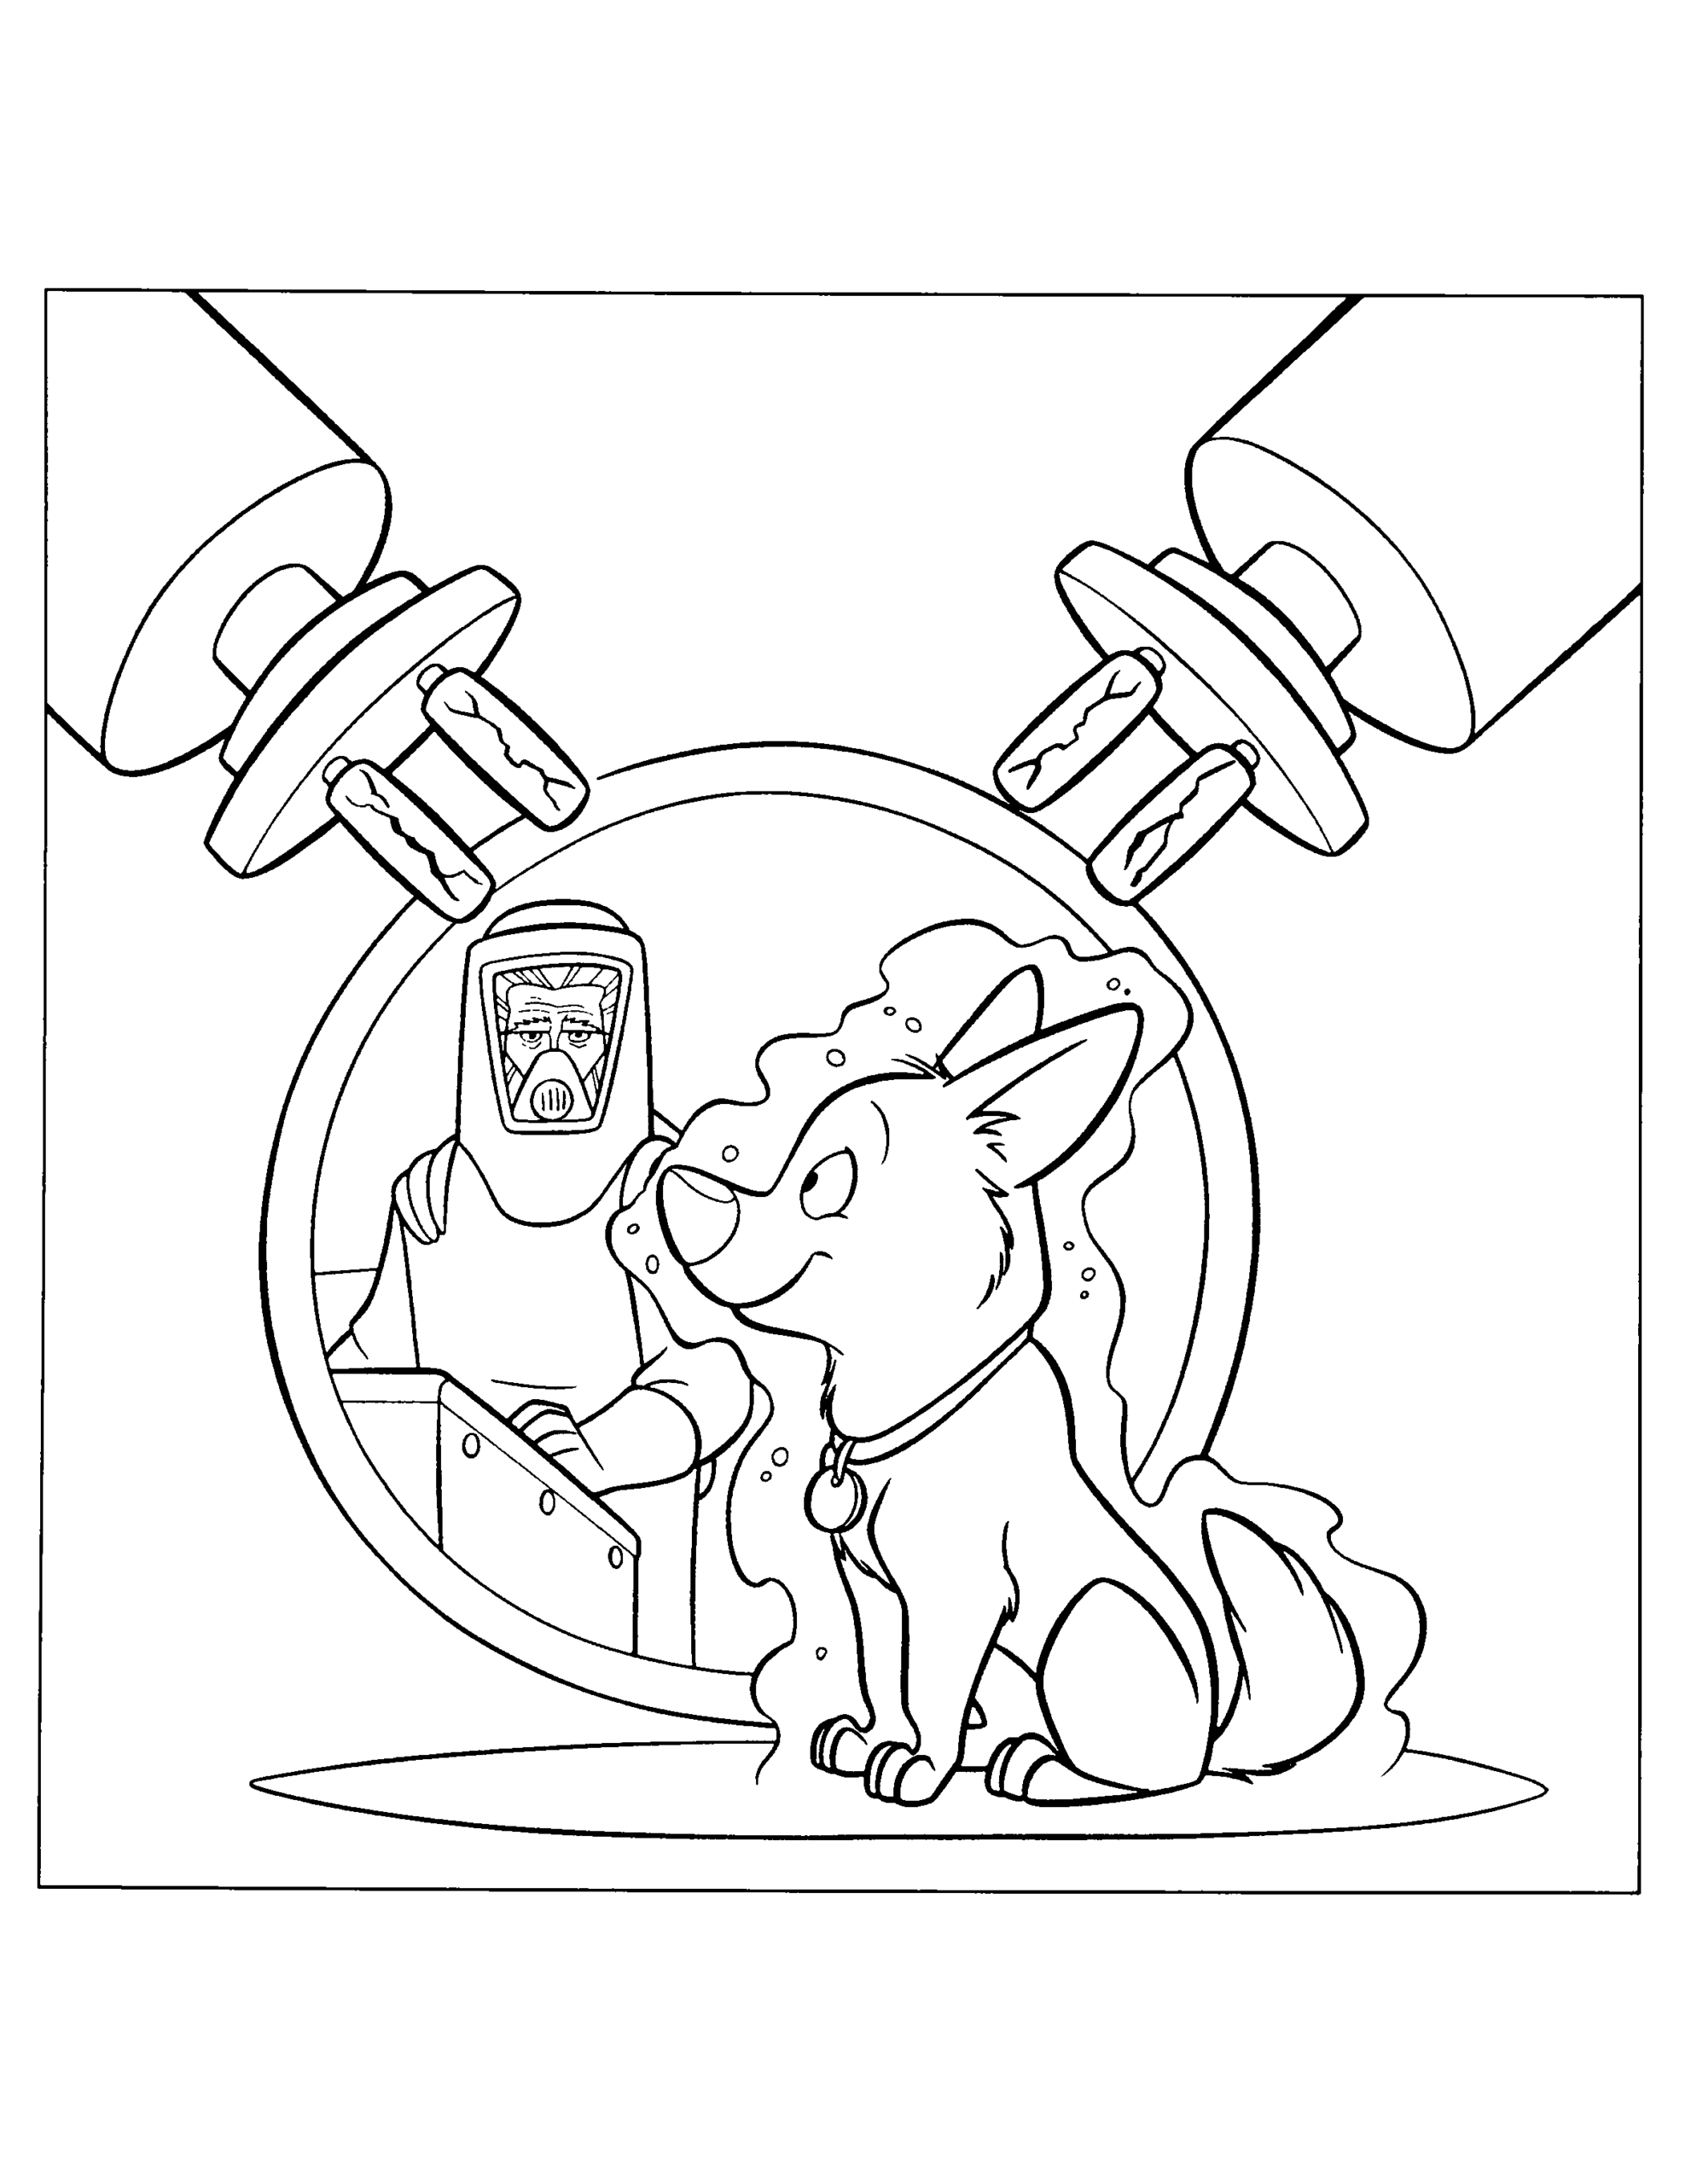 Bolt Coloring Pages TV Film bolt 7 Printable 2020 01225 Coloring4free